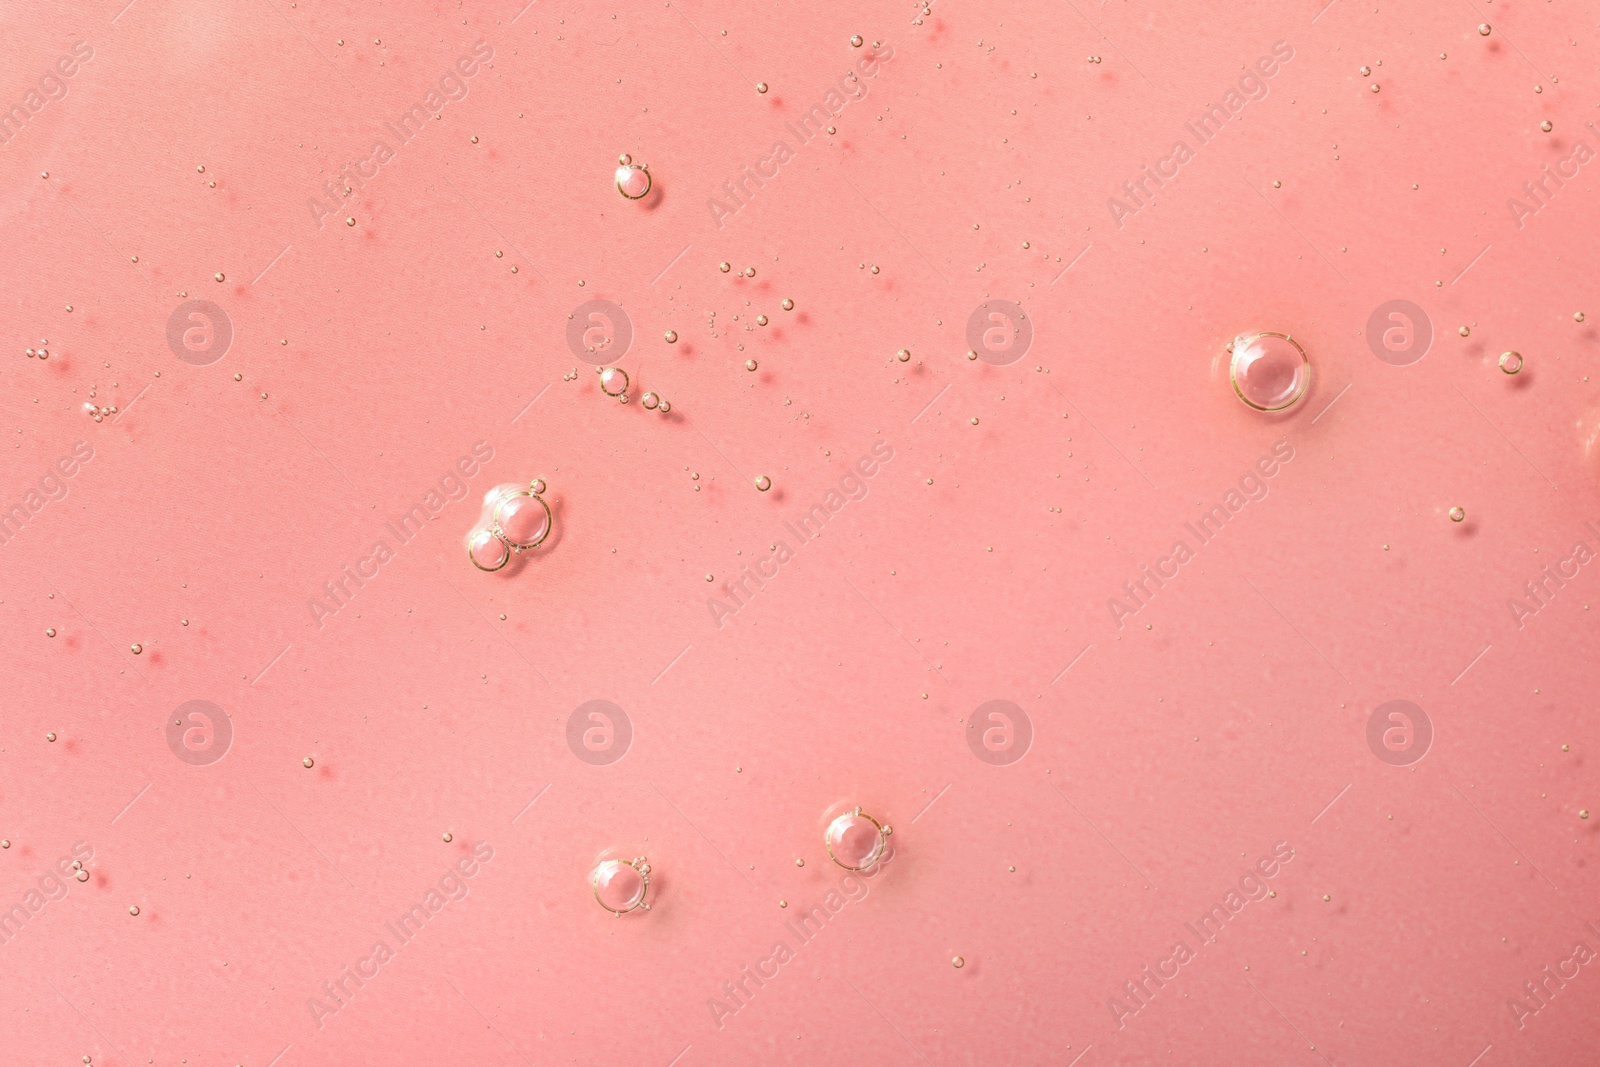 Photo of Sample of hydrophilic oil on pink background, top view